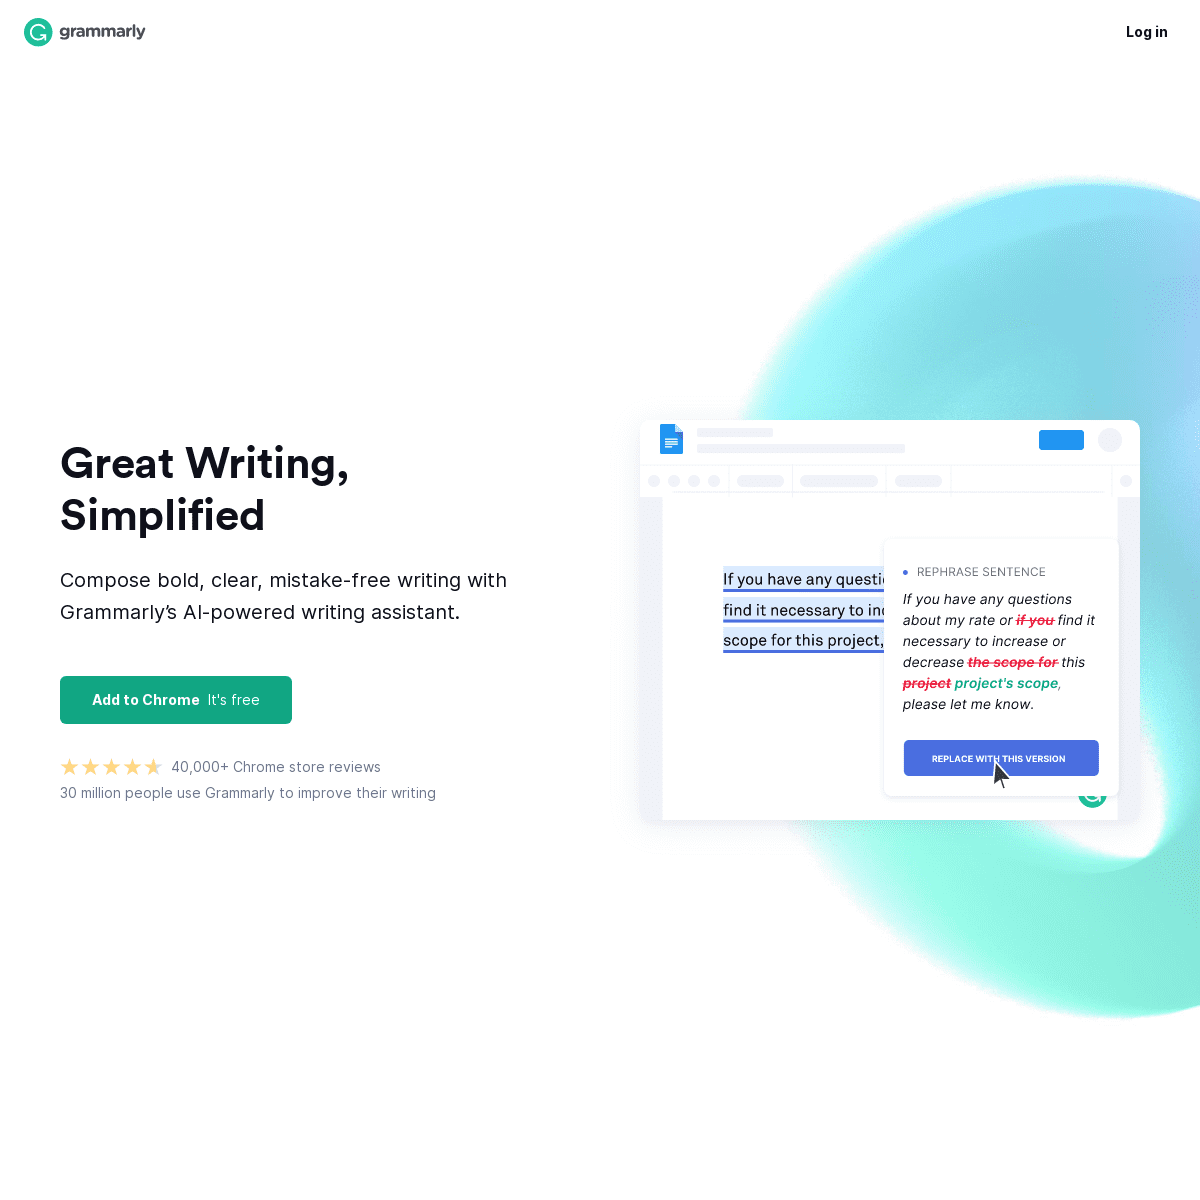 A complete backup of https://www.grammarly.com/